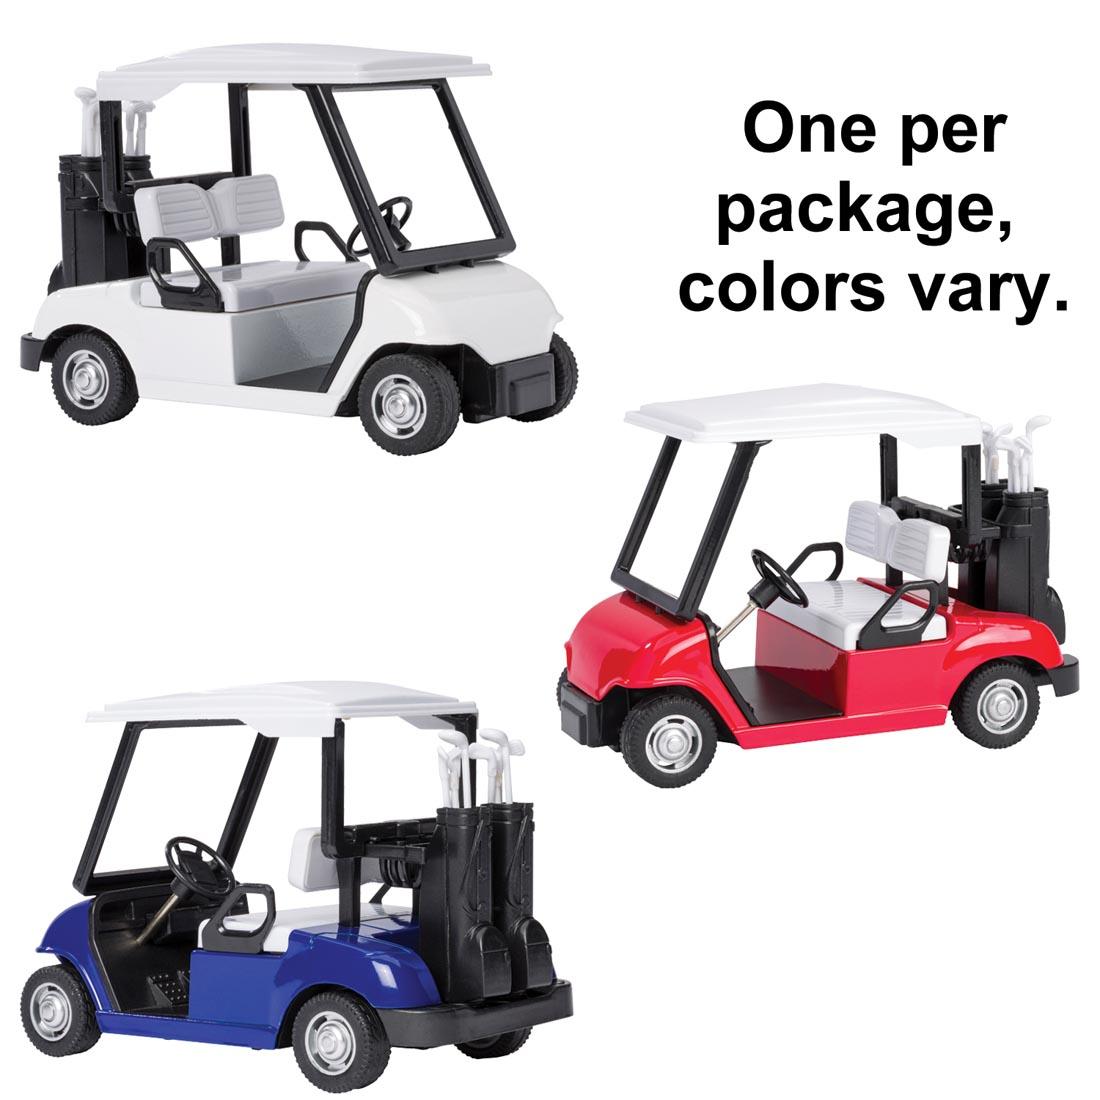 Three different Golf Cart Pull-Back Toys with the text One per package, colors vary.